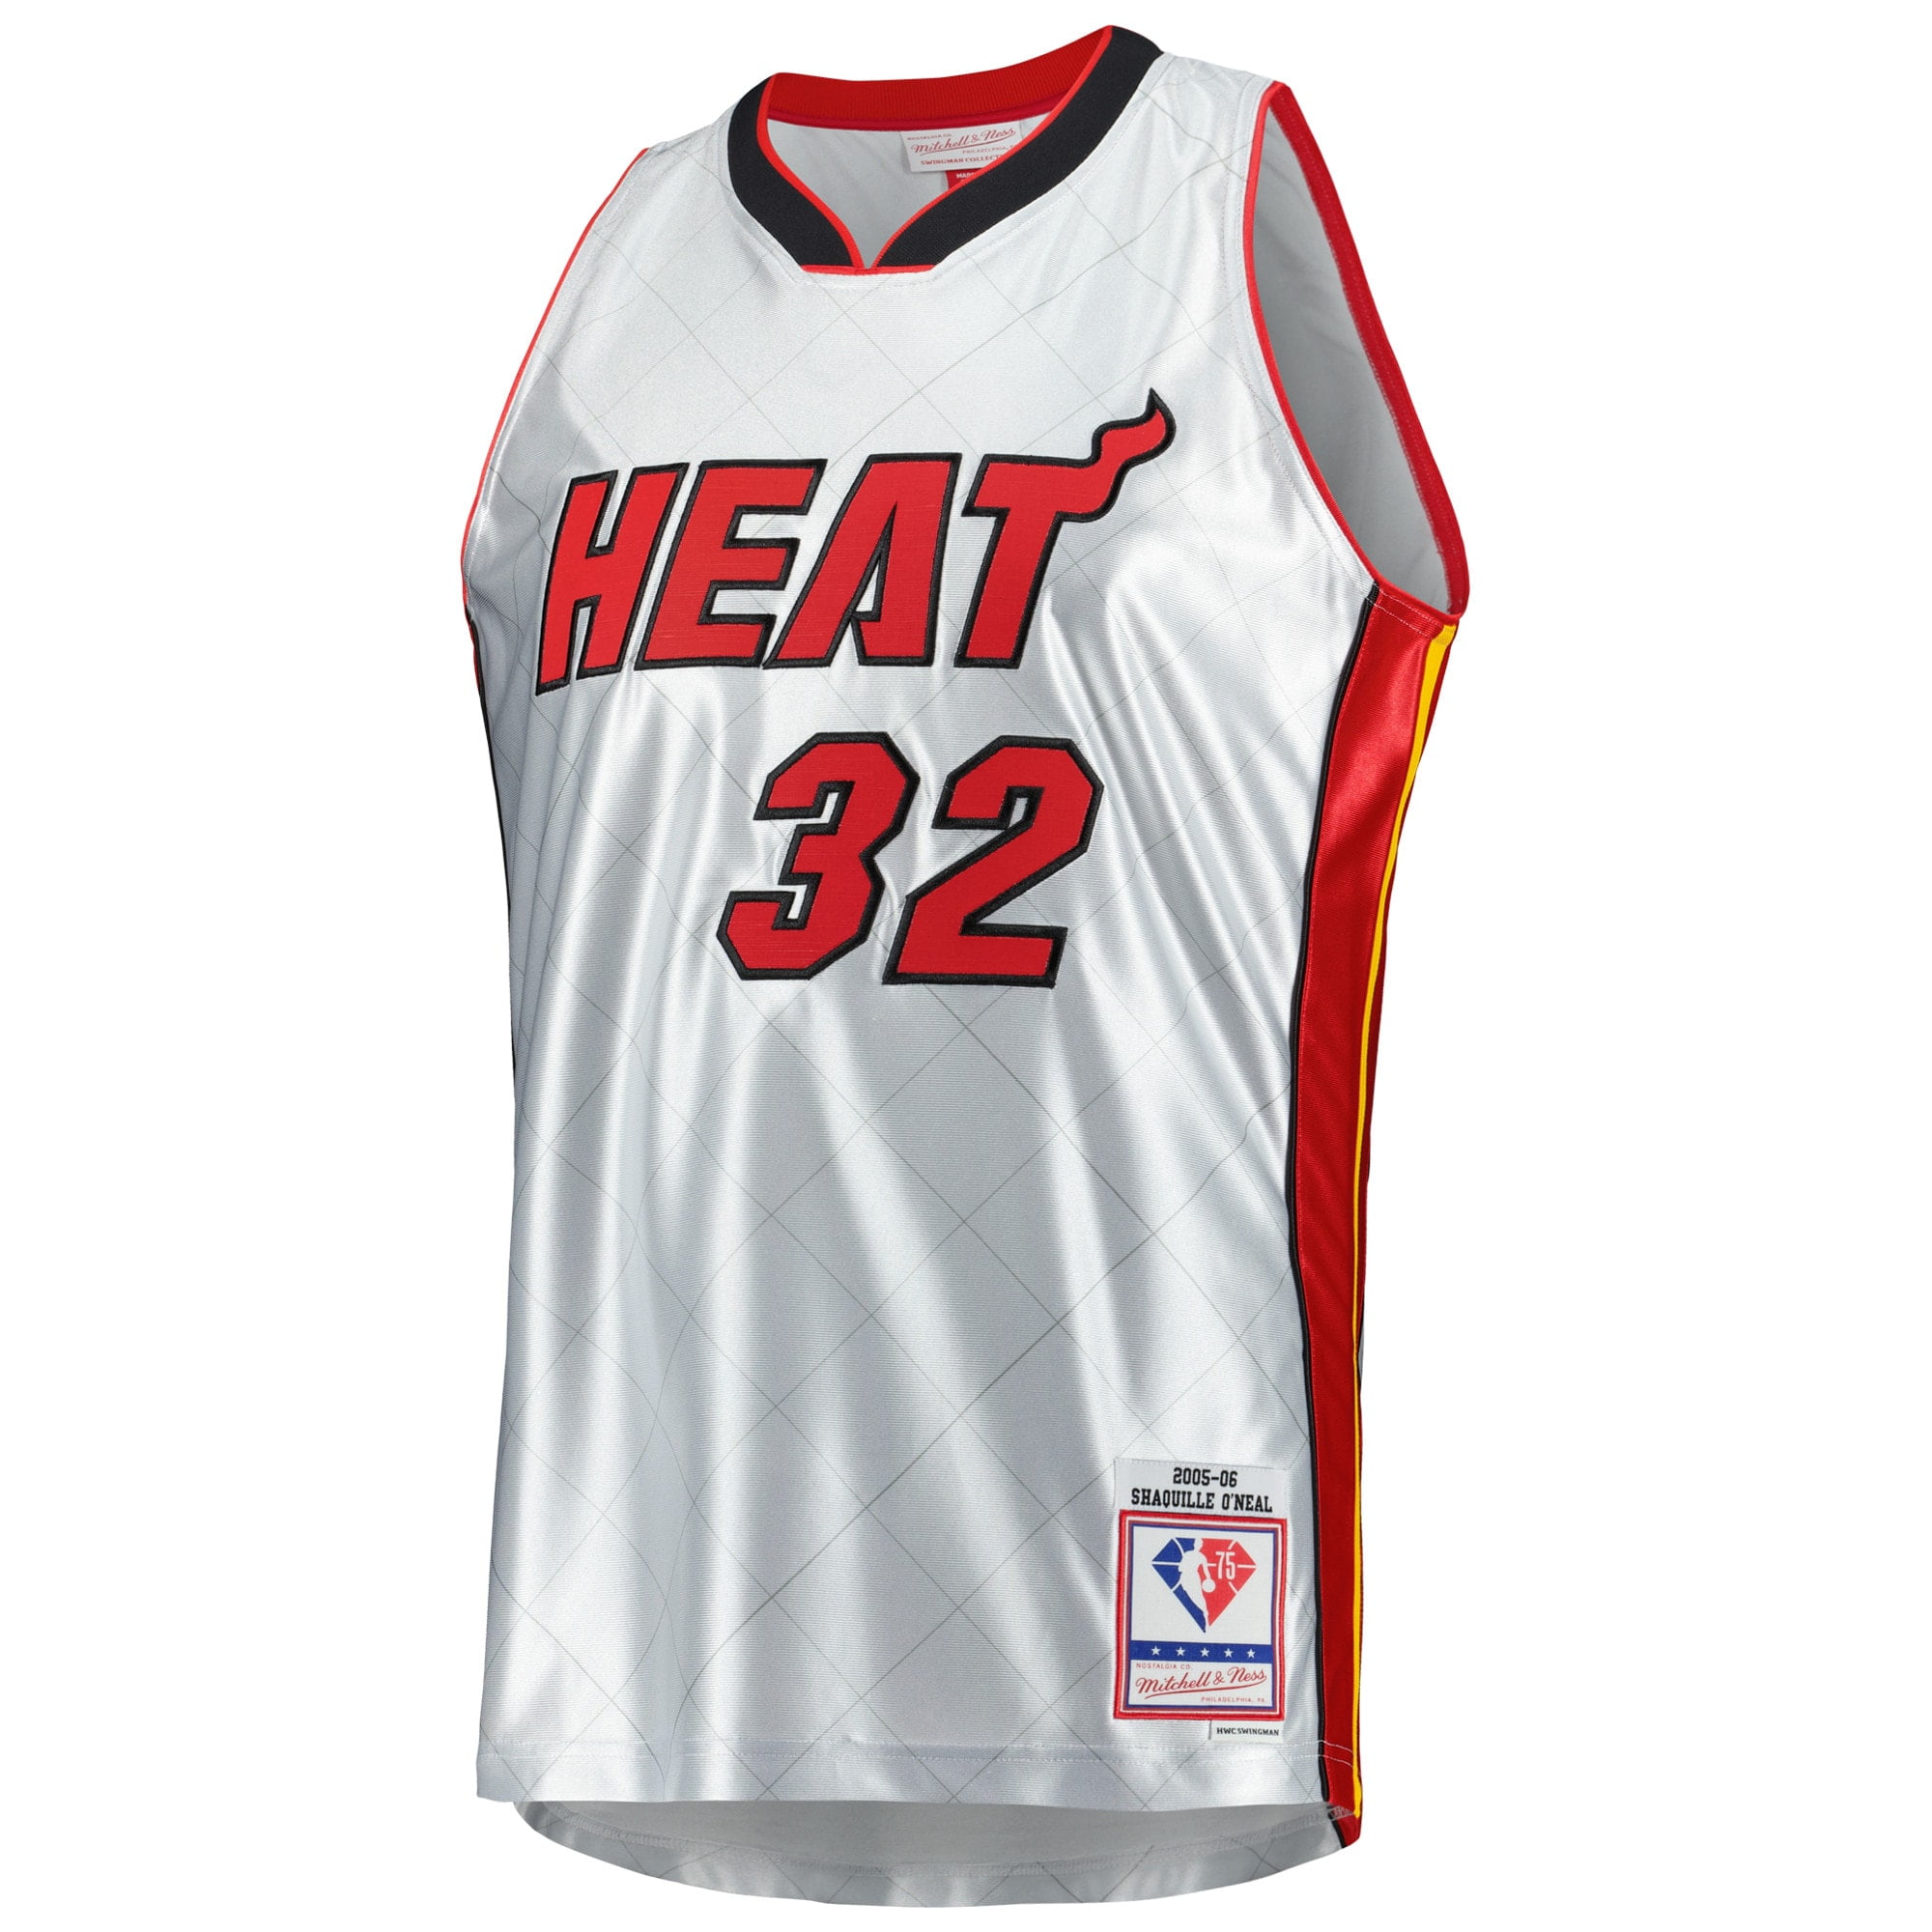 Mitchell & Ness Miami Heat - Shaquille O'Neal 2.0 2005-06 Jersey